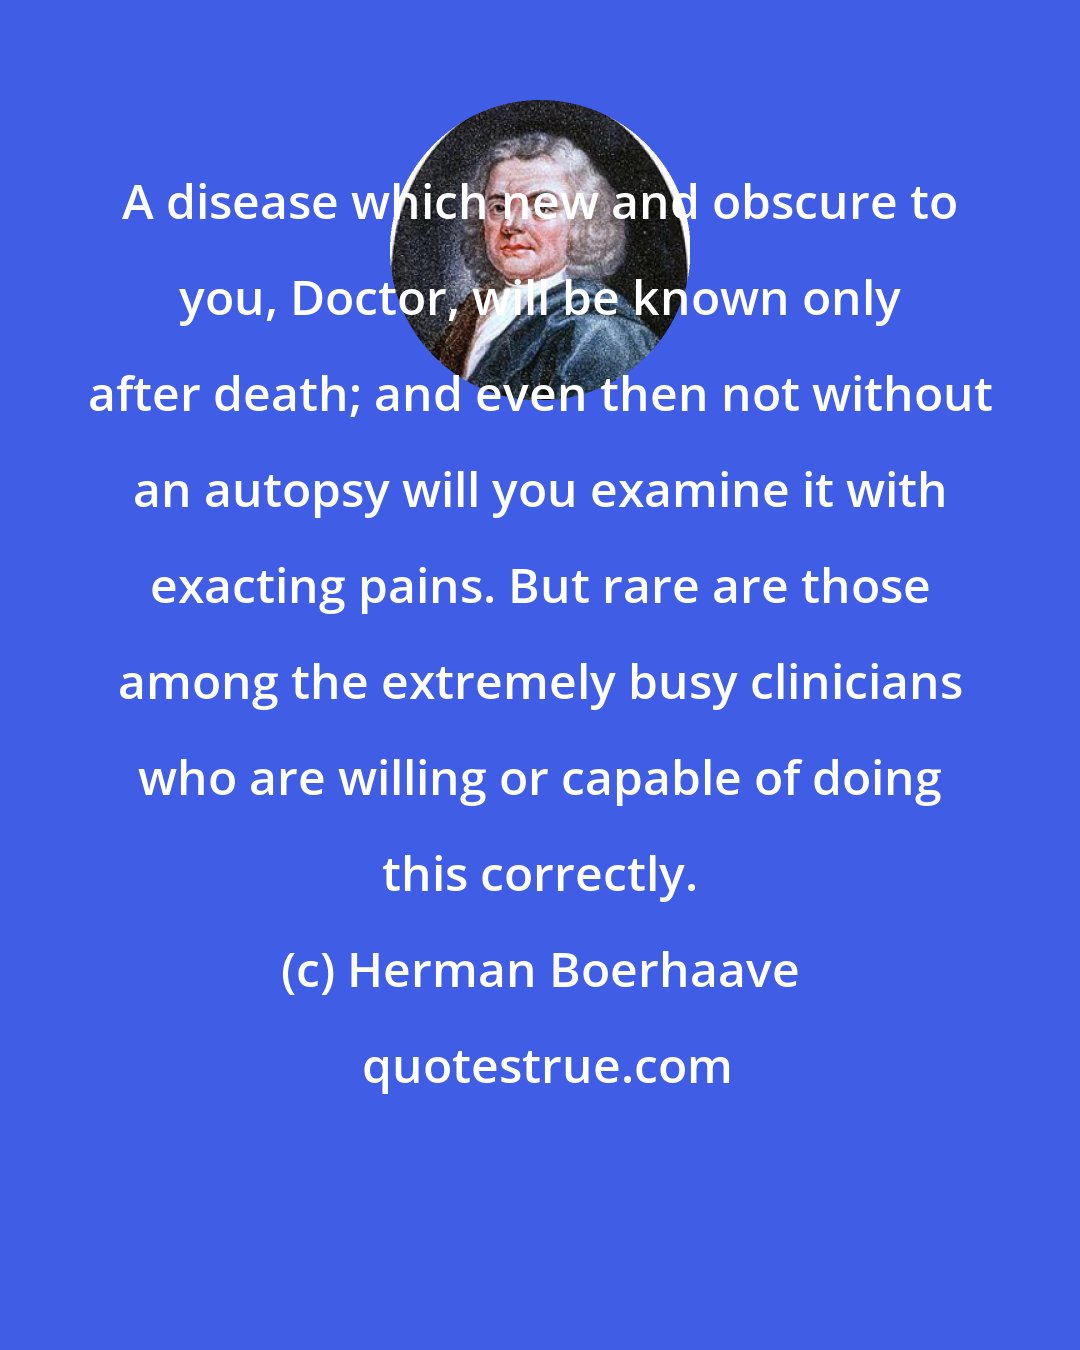 Herman Boerhaave: A disease which new and obscure to you, Doctor, will be known only after death; and even then not without an autopsy will you examine it with exacting pains. But rare are those among the extremely busy clinicians who are willing or capable of doing this correctly.